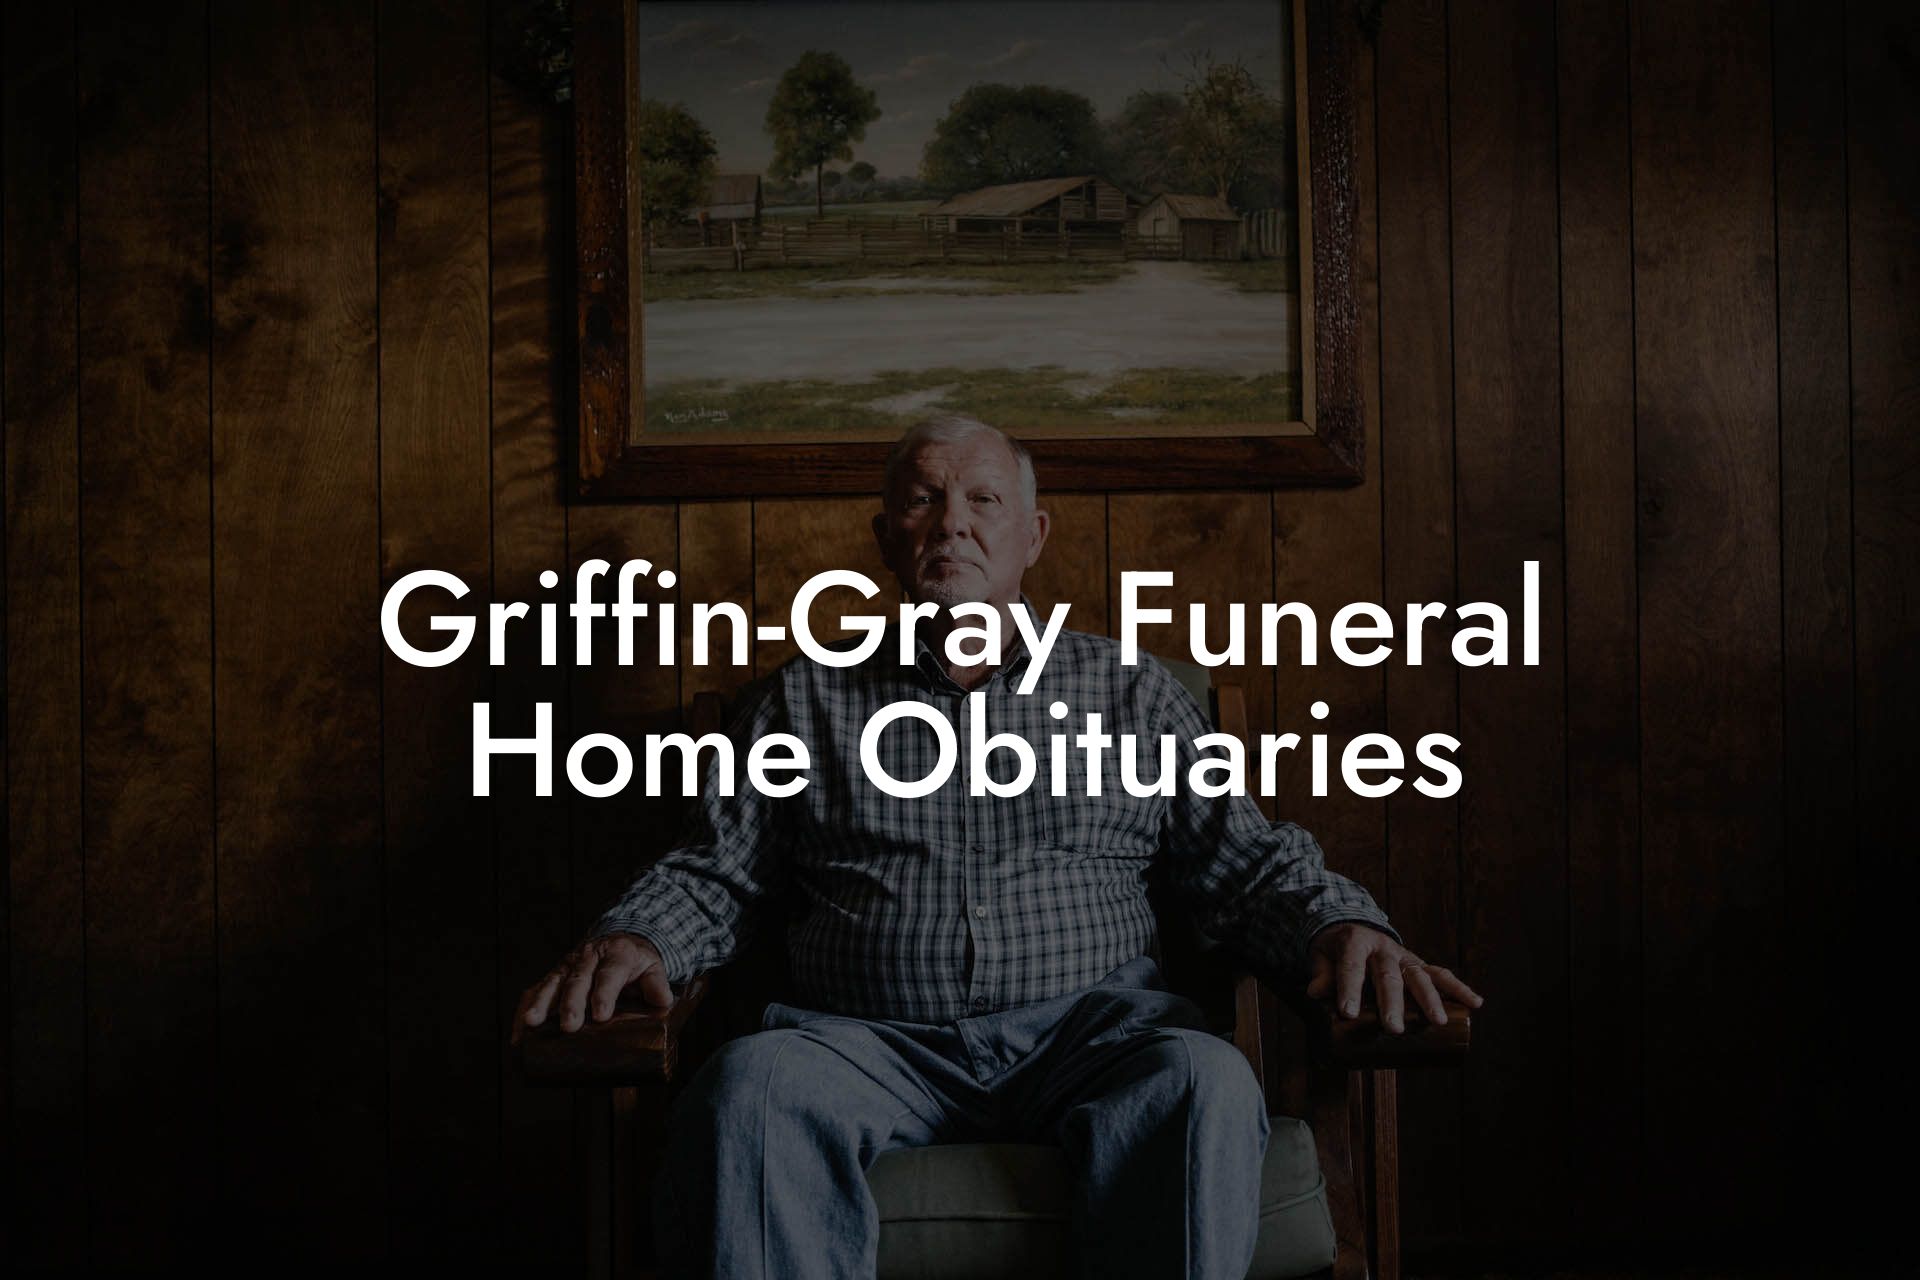 Griffin-Gray Funeral Home Obituaries